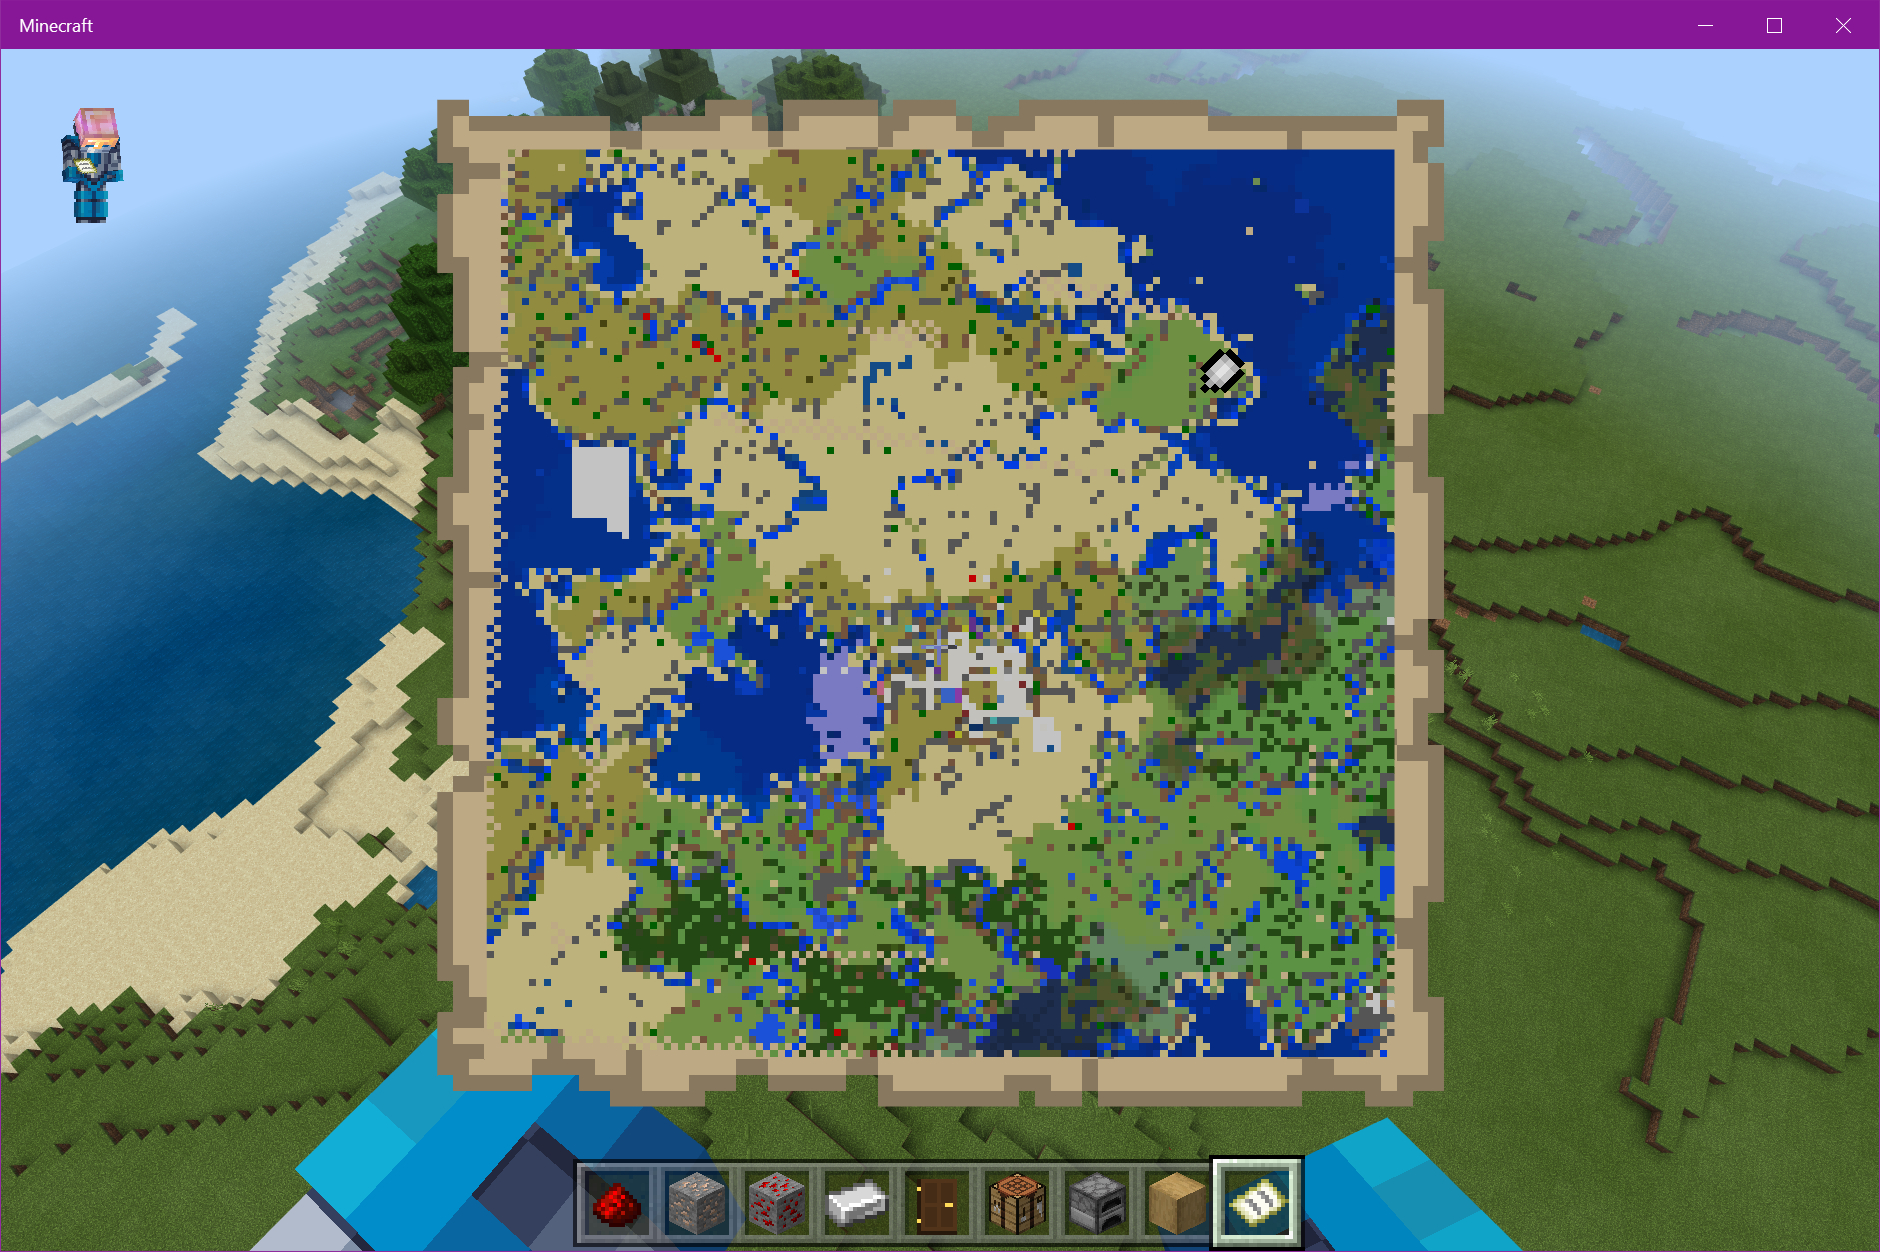 How to Make a Map in Minecraft | Digital Trends